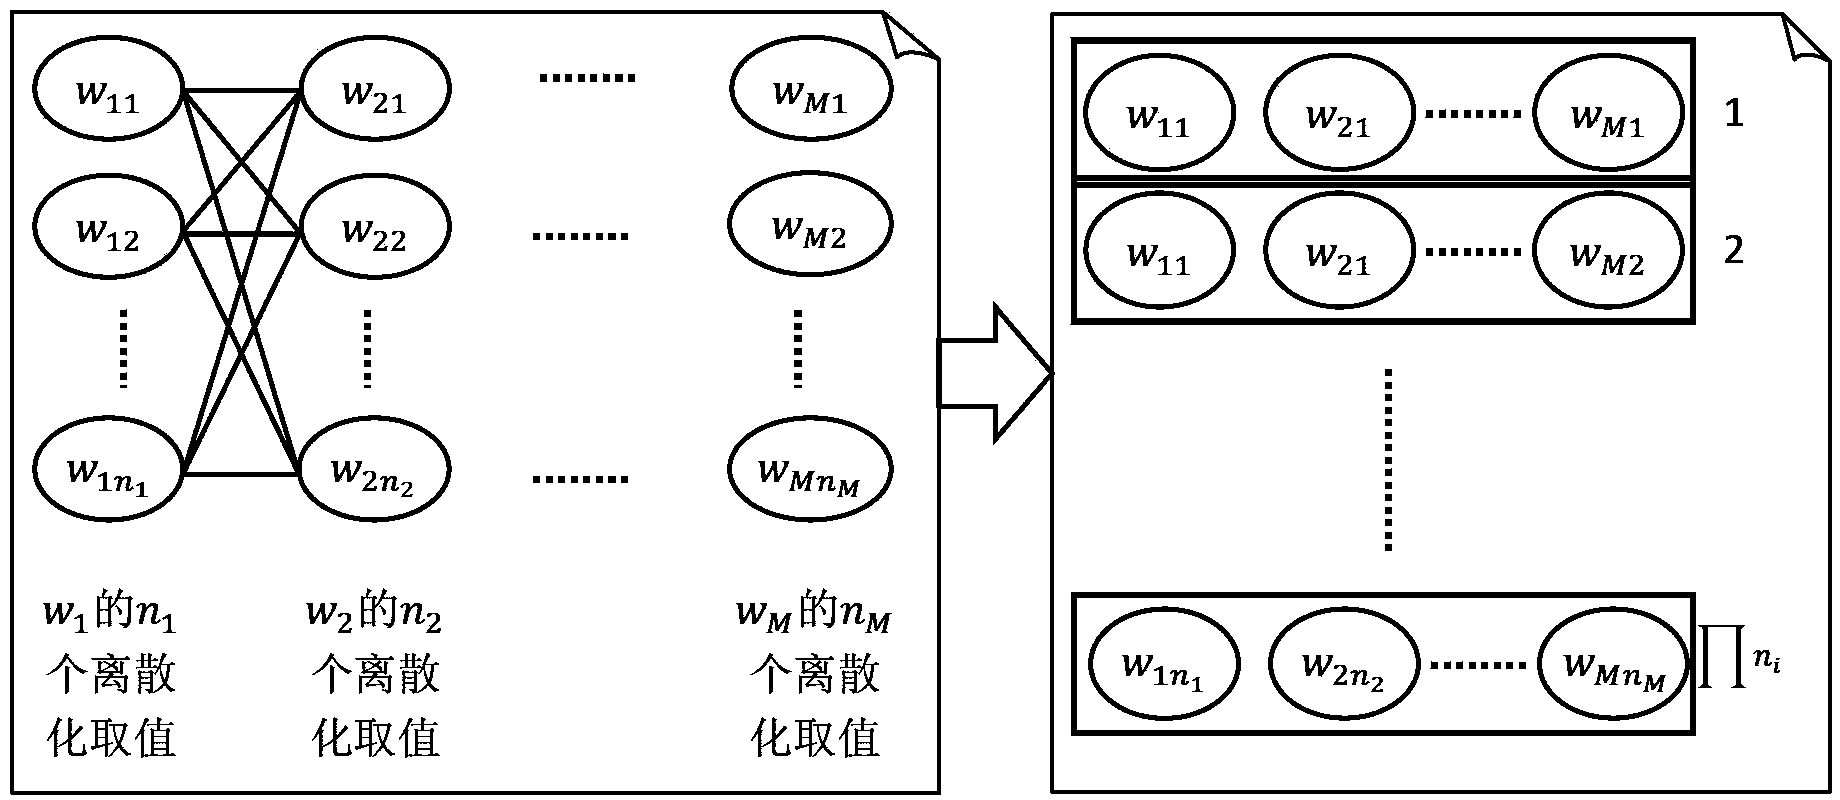 Method for selecting web services guided by user certainty degree in Cloud environment